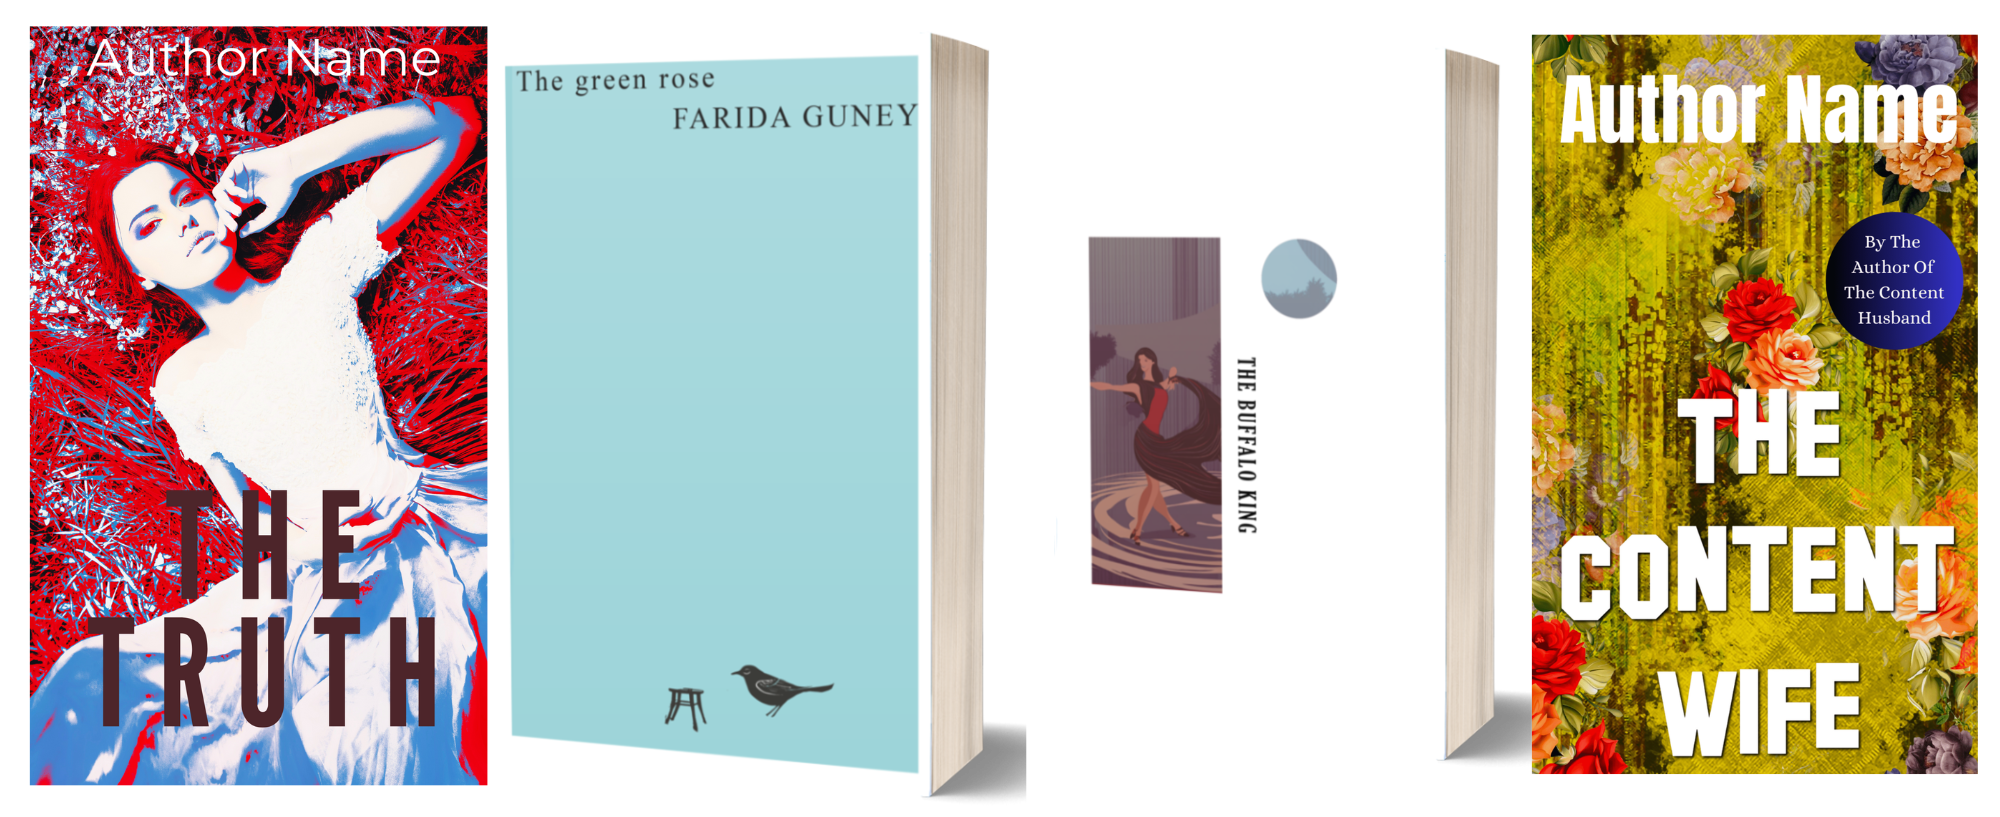 The image shows four book covers. From left to right: "The Truth" depicts a woman in red and blue. "The Green Rose" by Farida Guney has a green rose and a bird on a light blue background. "The Buffalo King" has a minimalist design with a center image. "The Content Wife" features a floral background. BookSelf Book Cover Design & Premade Book Covers